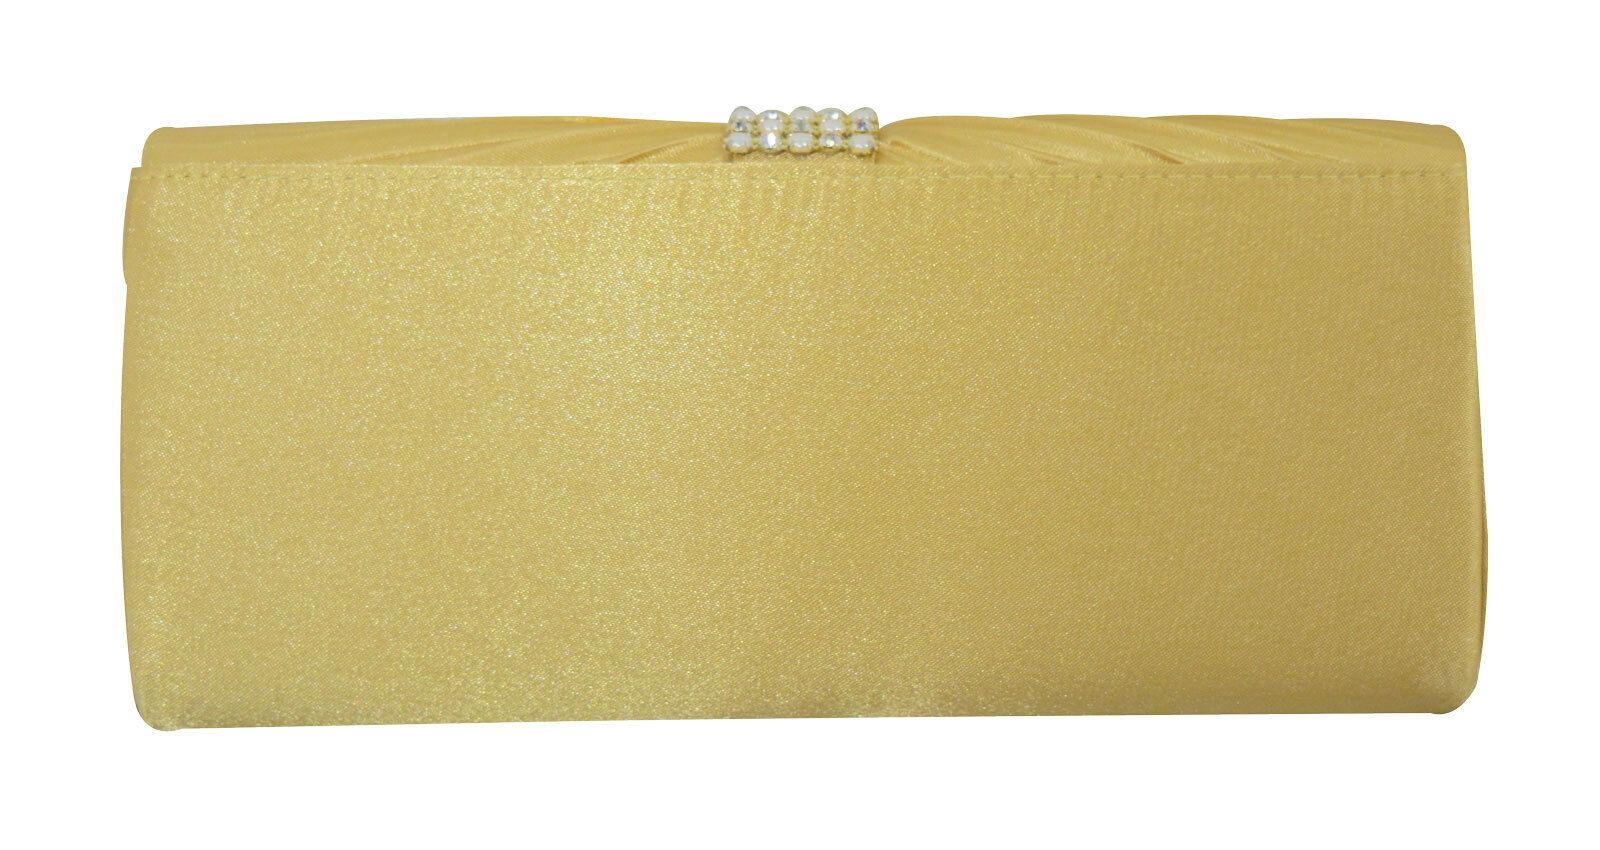 Ladies Girls Satin Pleated Evening Party Wedding Prom Envelope Clutch Hand Bag - Labreeze